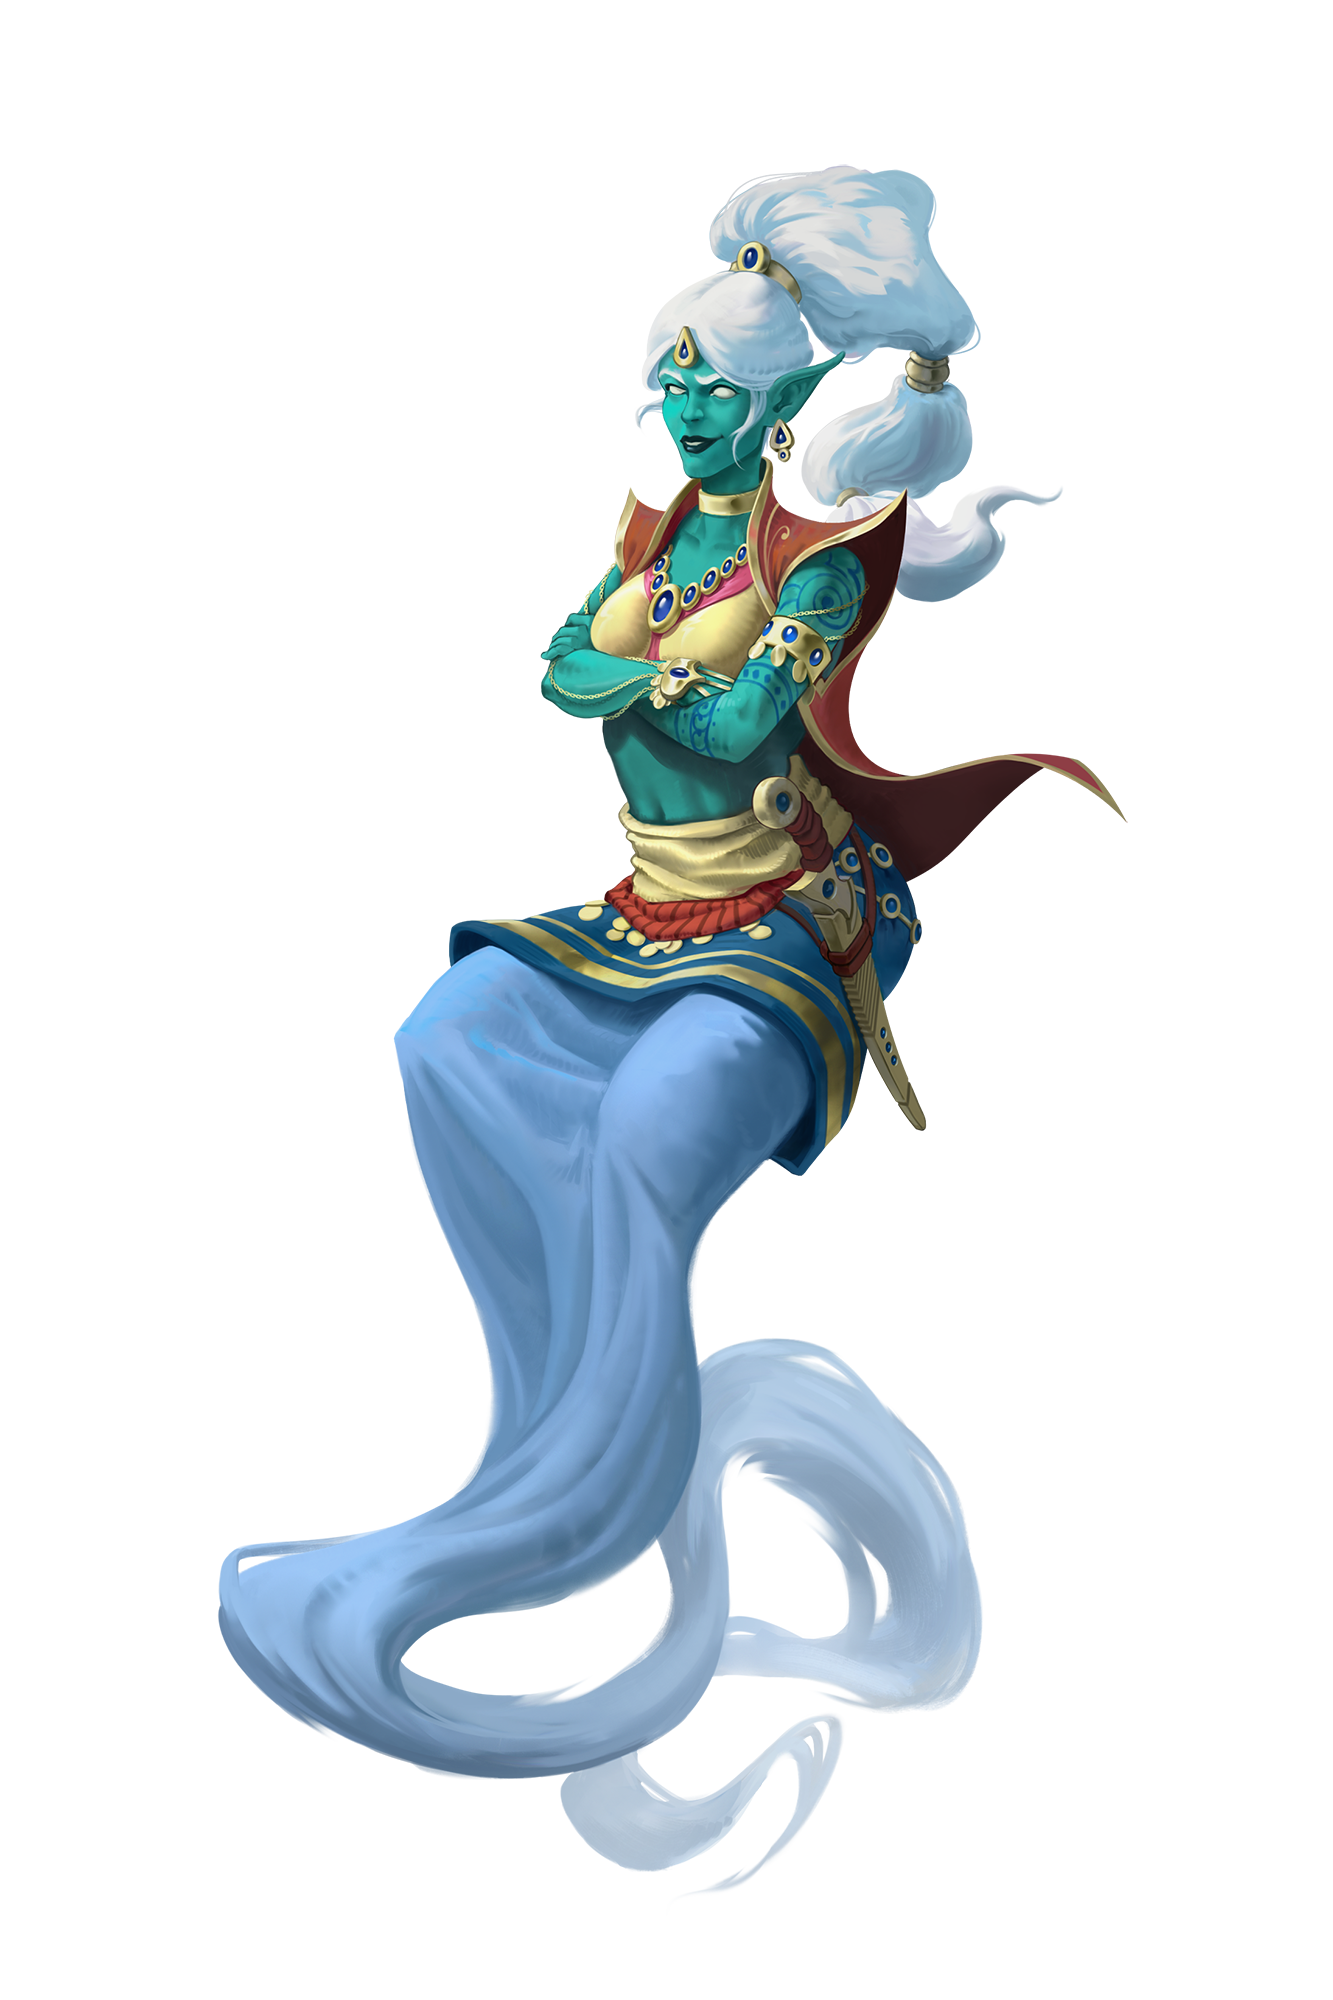 Safa a teal skinned djinni vizier dressed in red, blue, and gold with white hair pulled back into a high ponytail